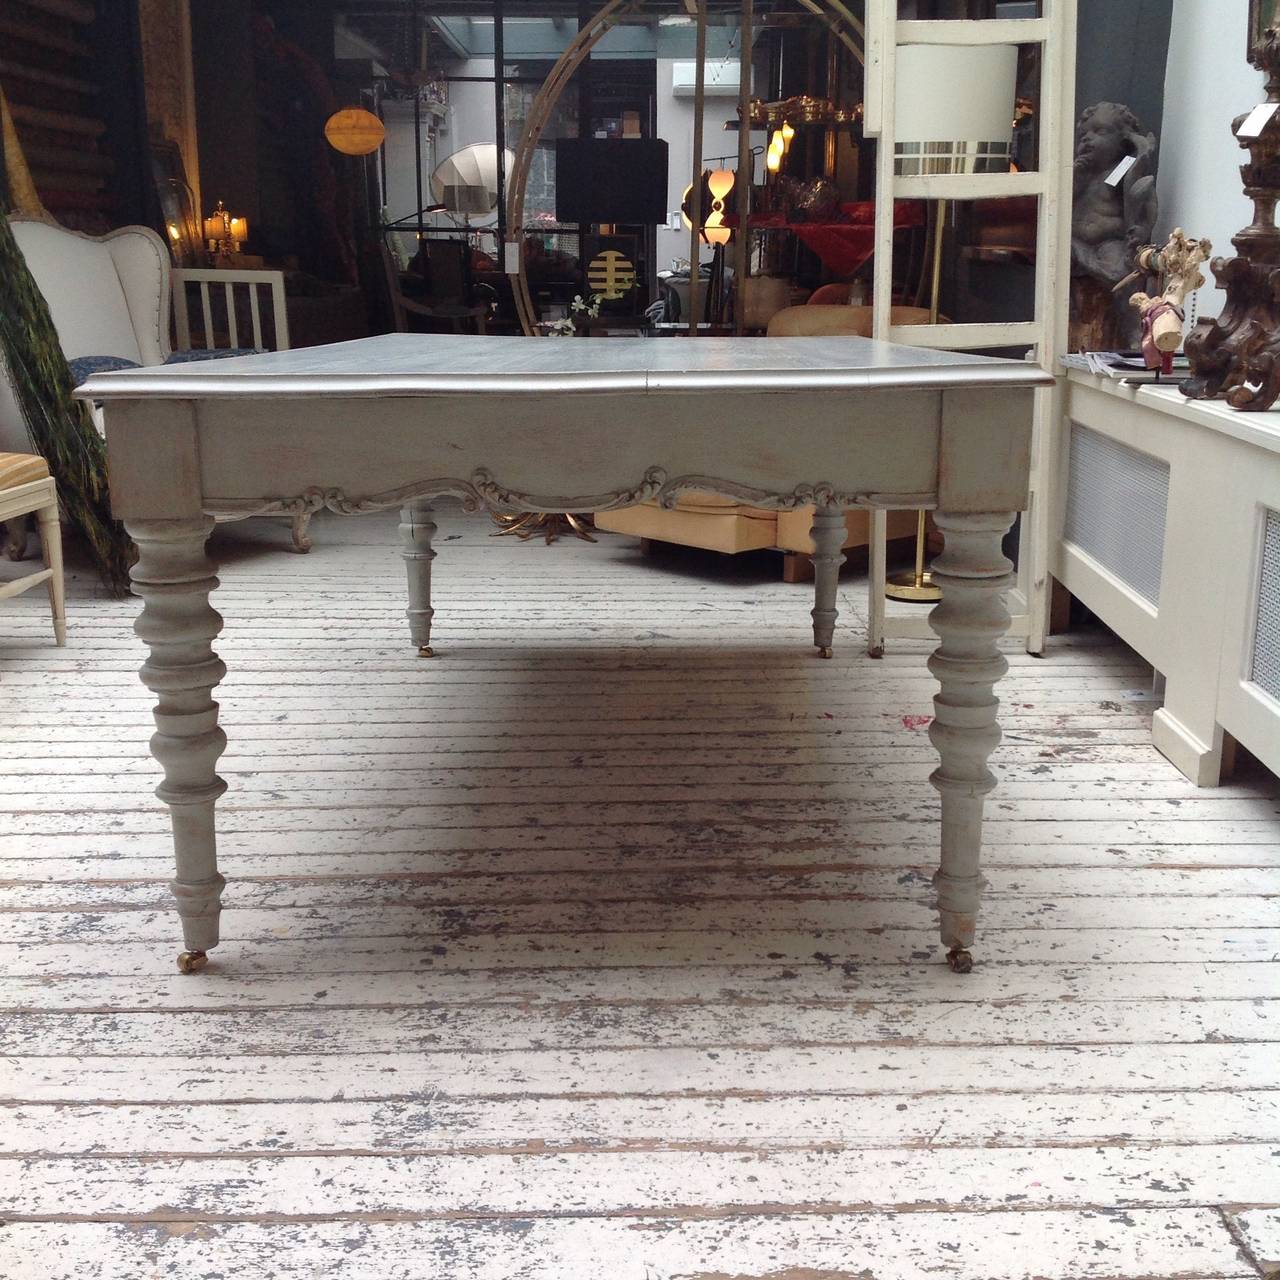 Perfect as both a desk and a dining table, this Swedish table from the mid-1800s is a great addition to any household. With simple yet sophisticated carved designs on both the base and the legs of the table, the pale color of the piece showcases the